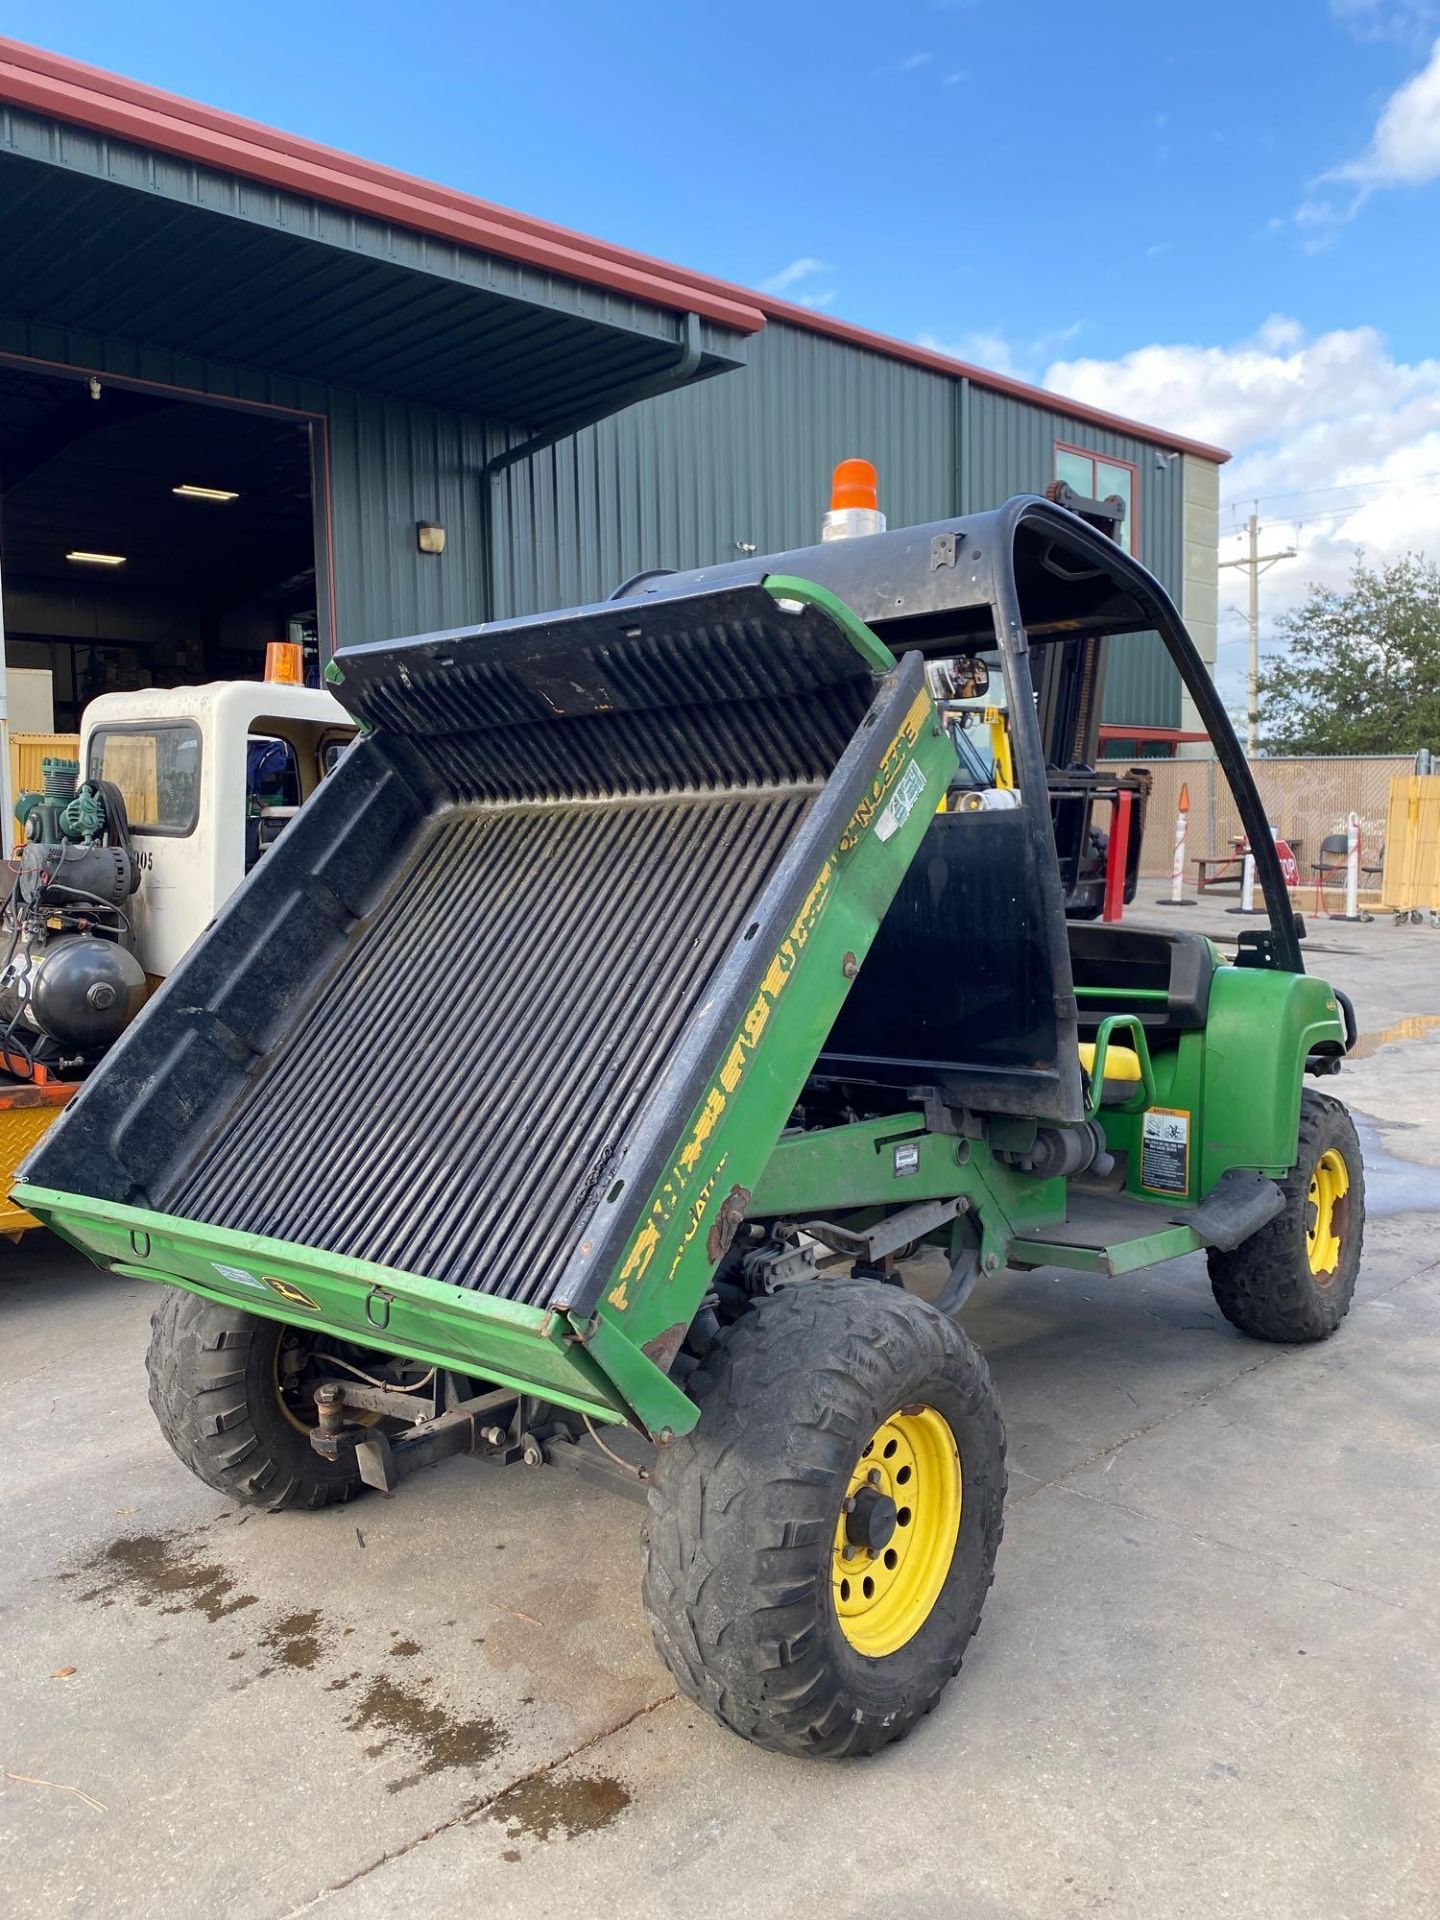 JOHN DEERE GATOR XUV UTILITY CART WITH HYDRAULIC DUMP BED, GAS POWERED, 1,713 HOURS SHOWING 4x4 - Image 5 of 9